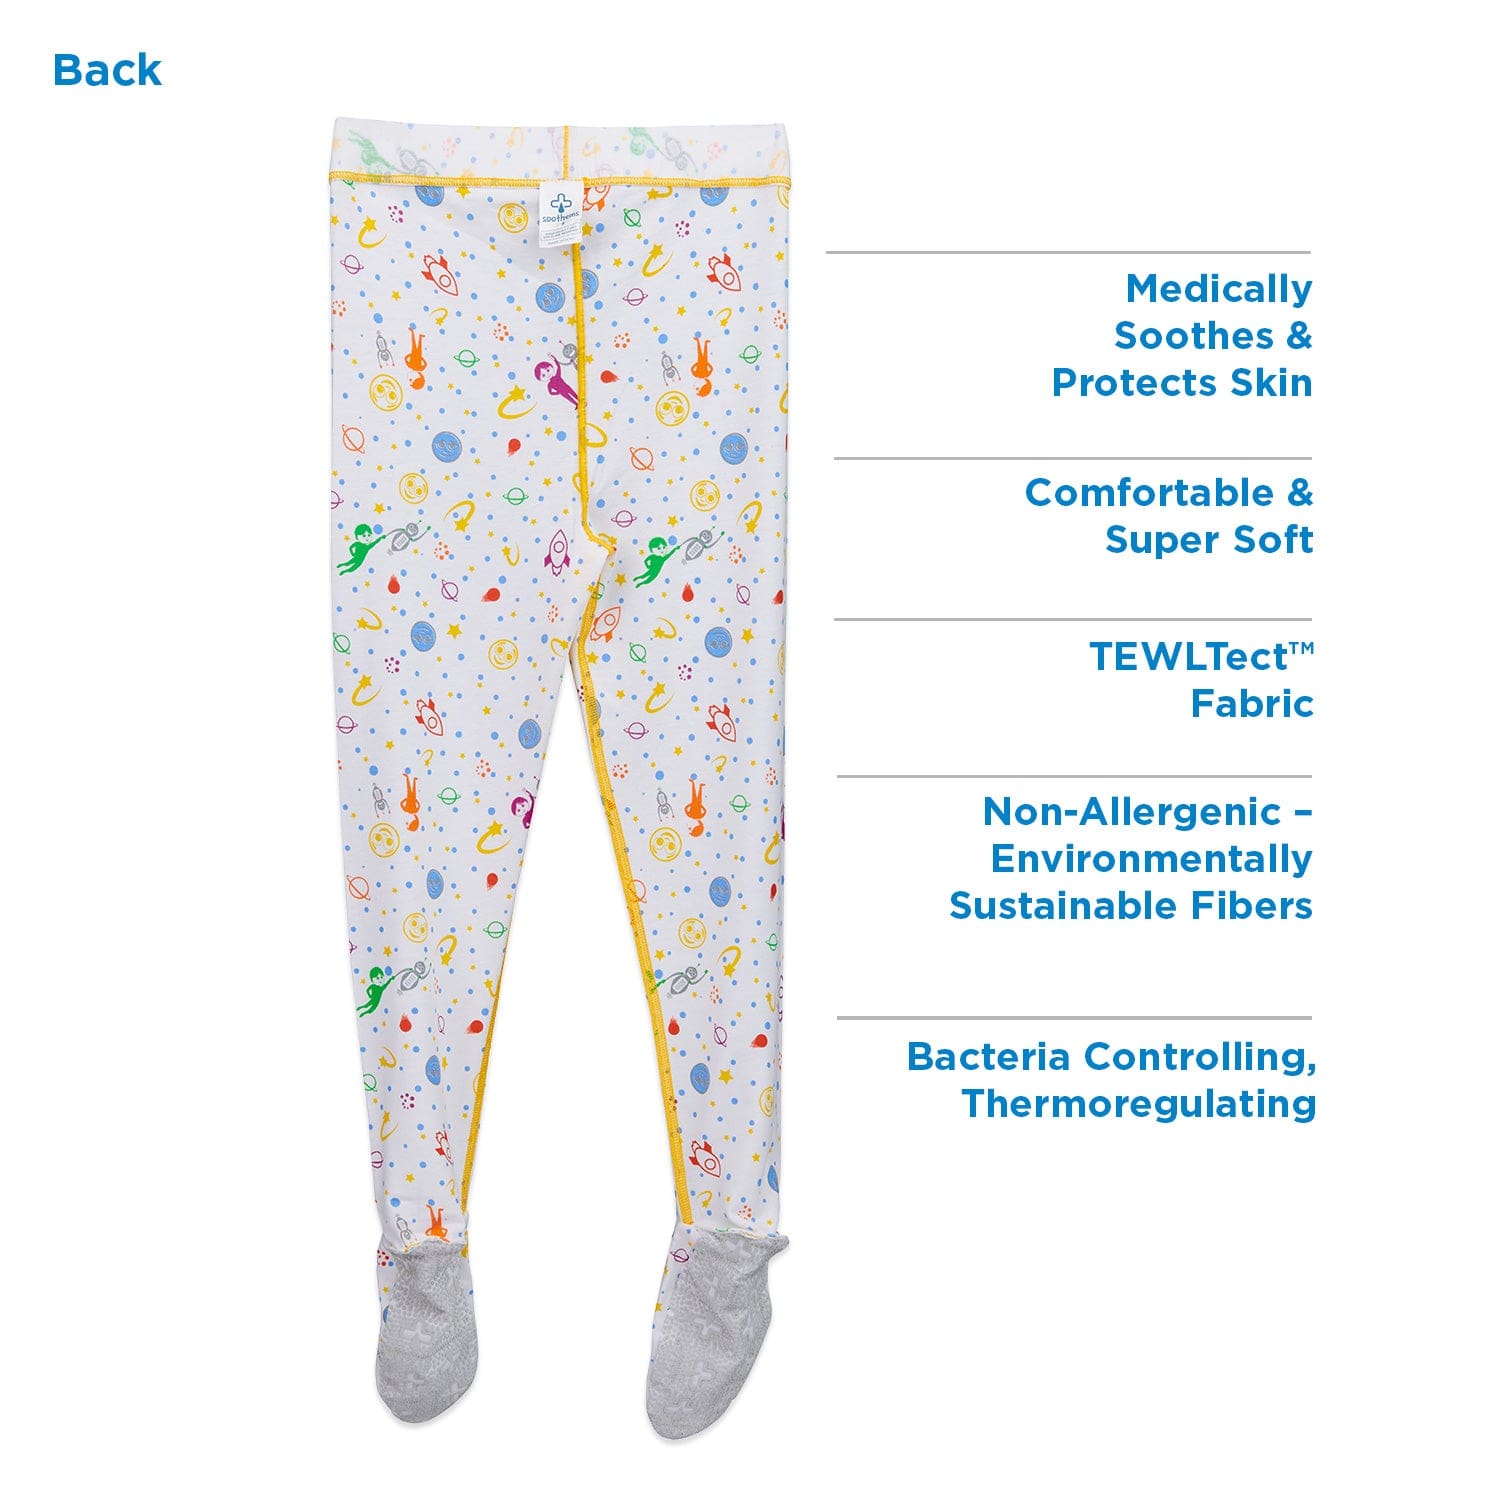 “Eczema Sleepwear children and Clothing Leggings Stop leg, knee, ankle and foot itching at Night”